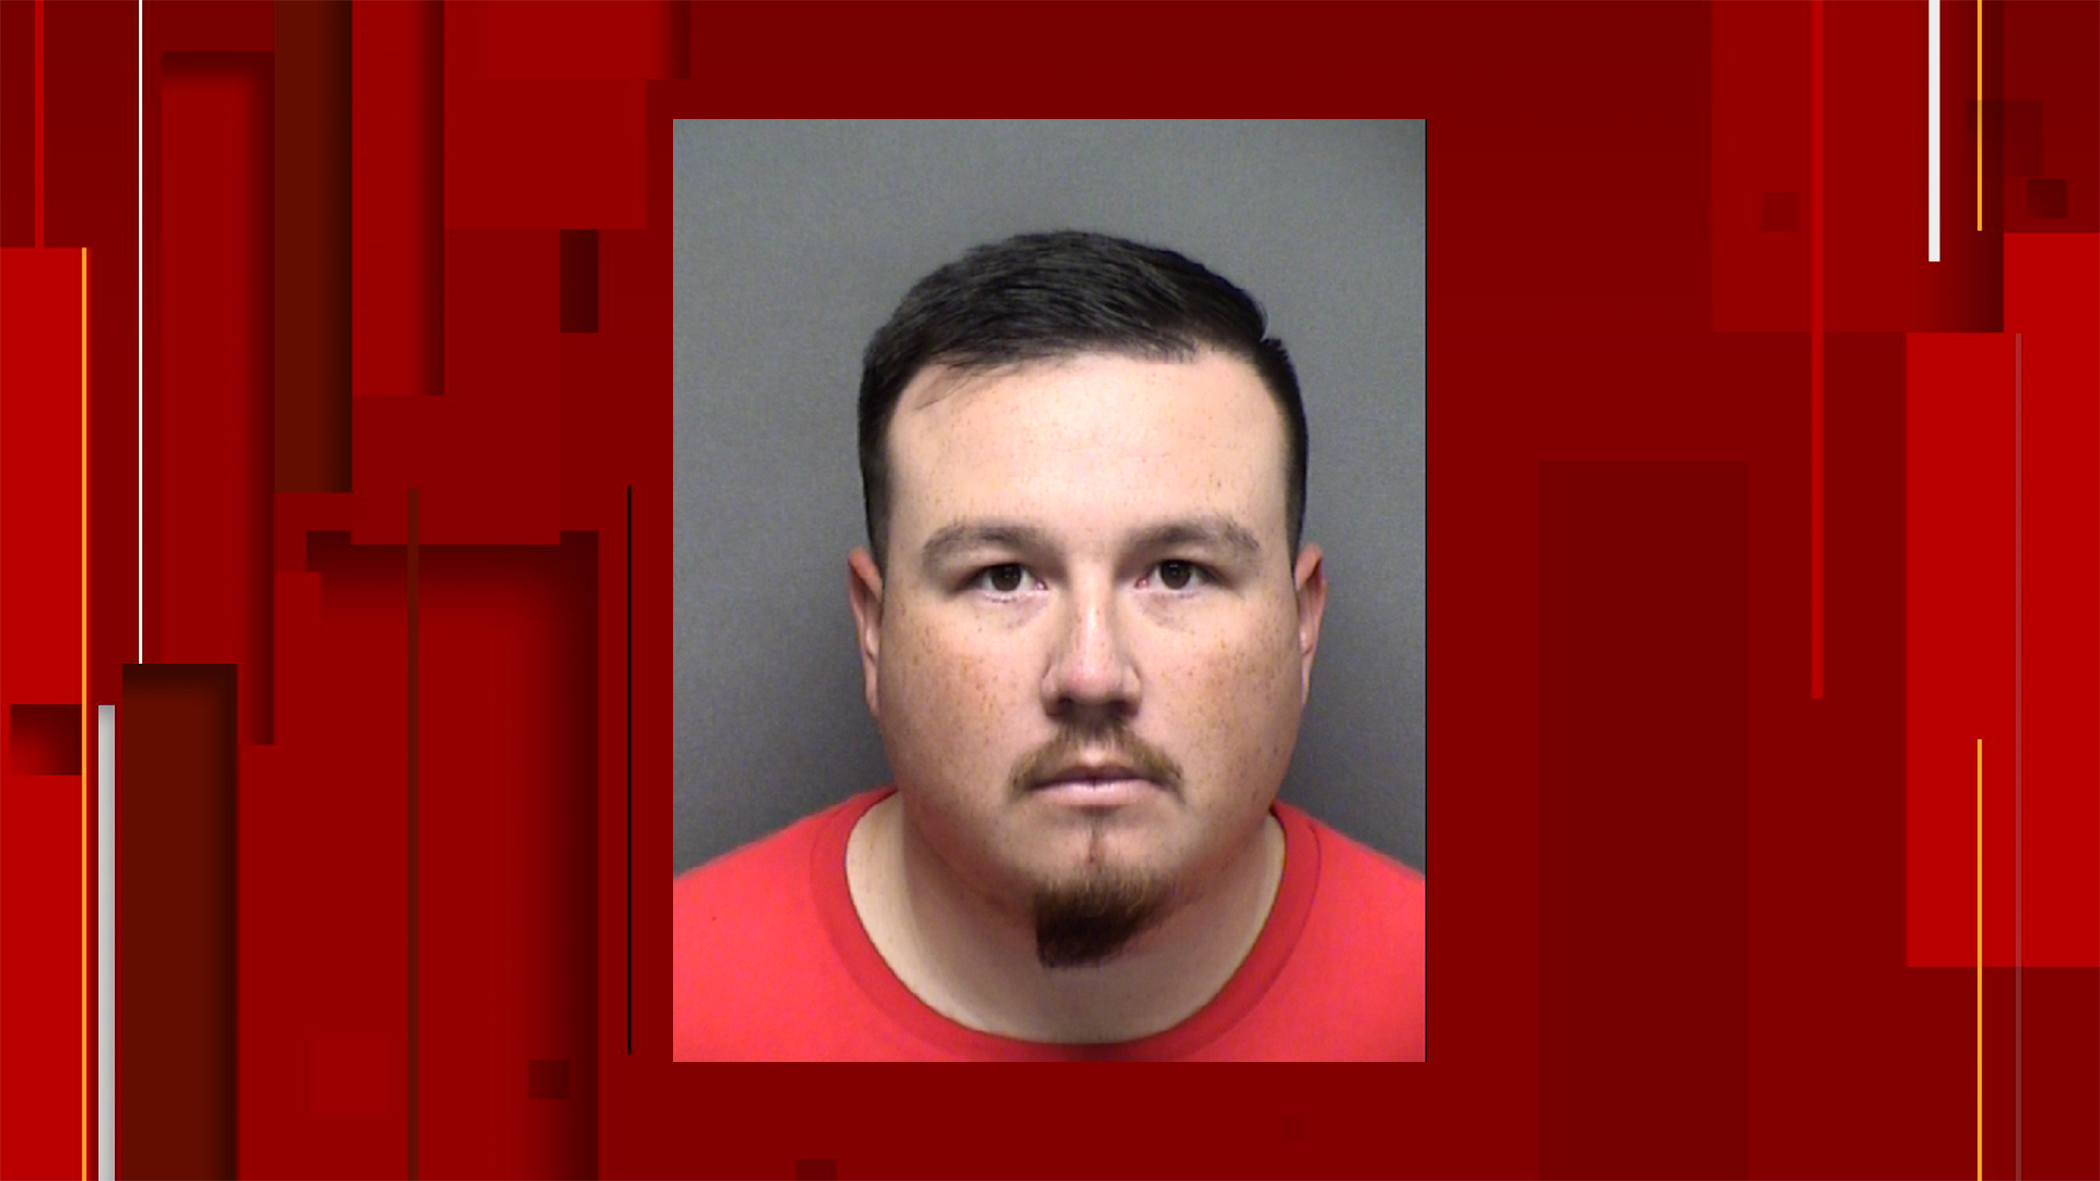 NEISD middle school teacher arrested after soliciting 14-year-old girl for sex, affidavit says